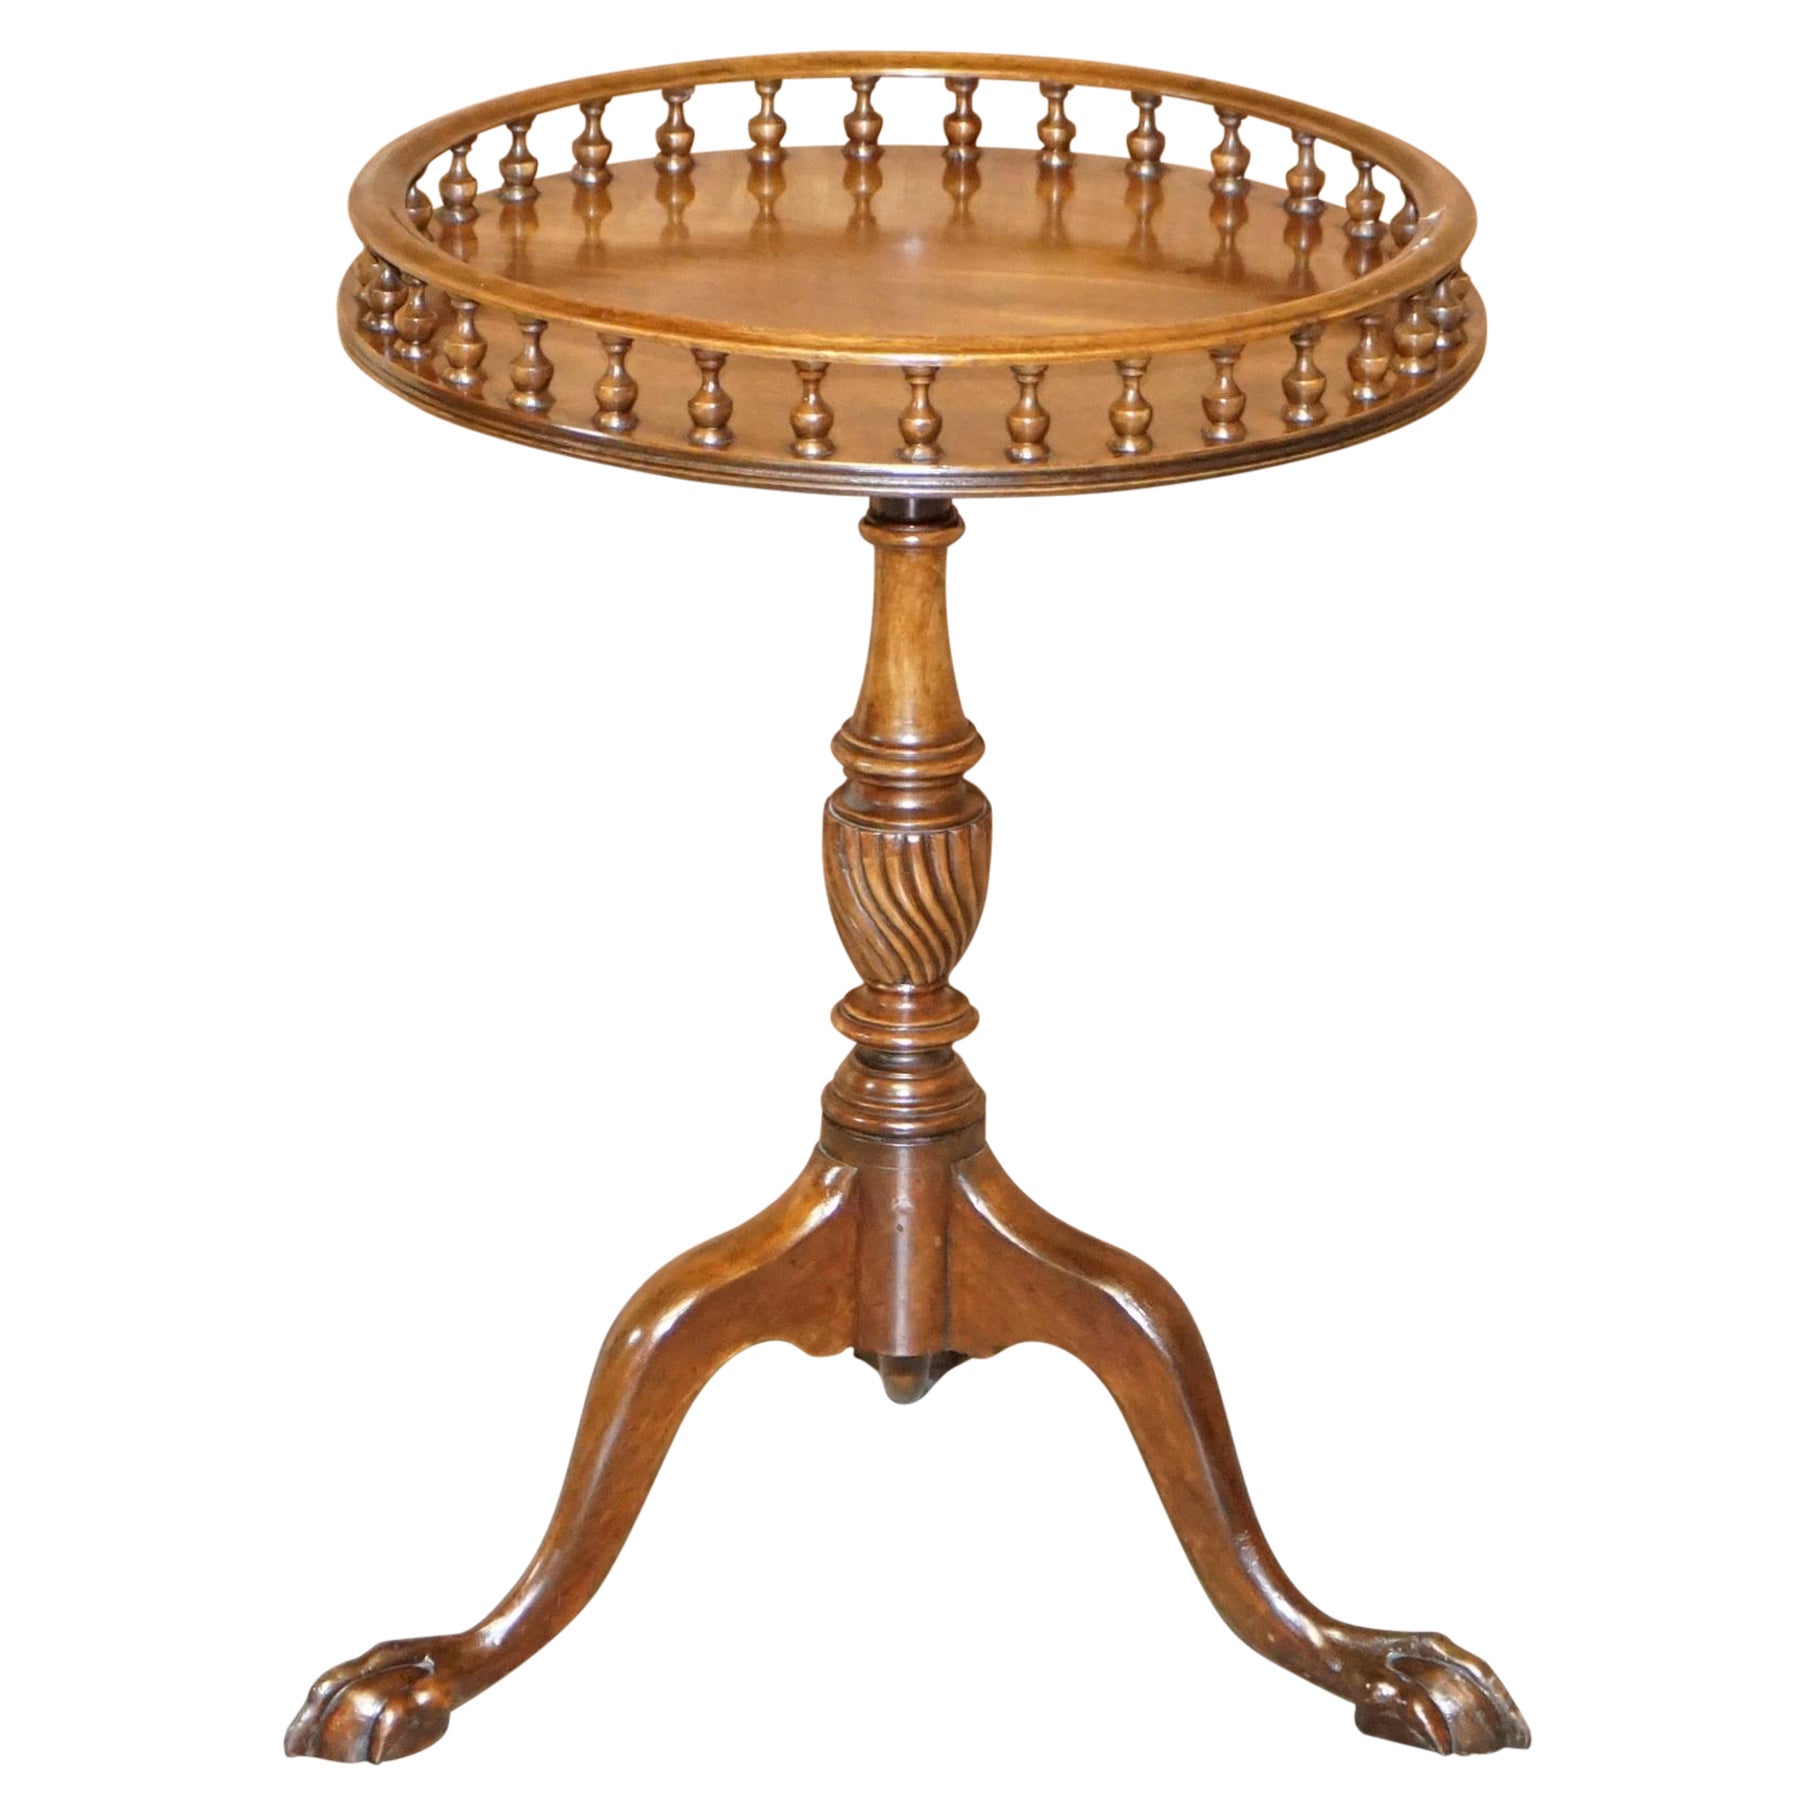 Flamed Hardwood Gallery Rail Side Table with Claw & Ball Feet Regency Style